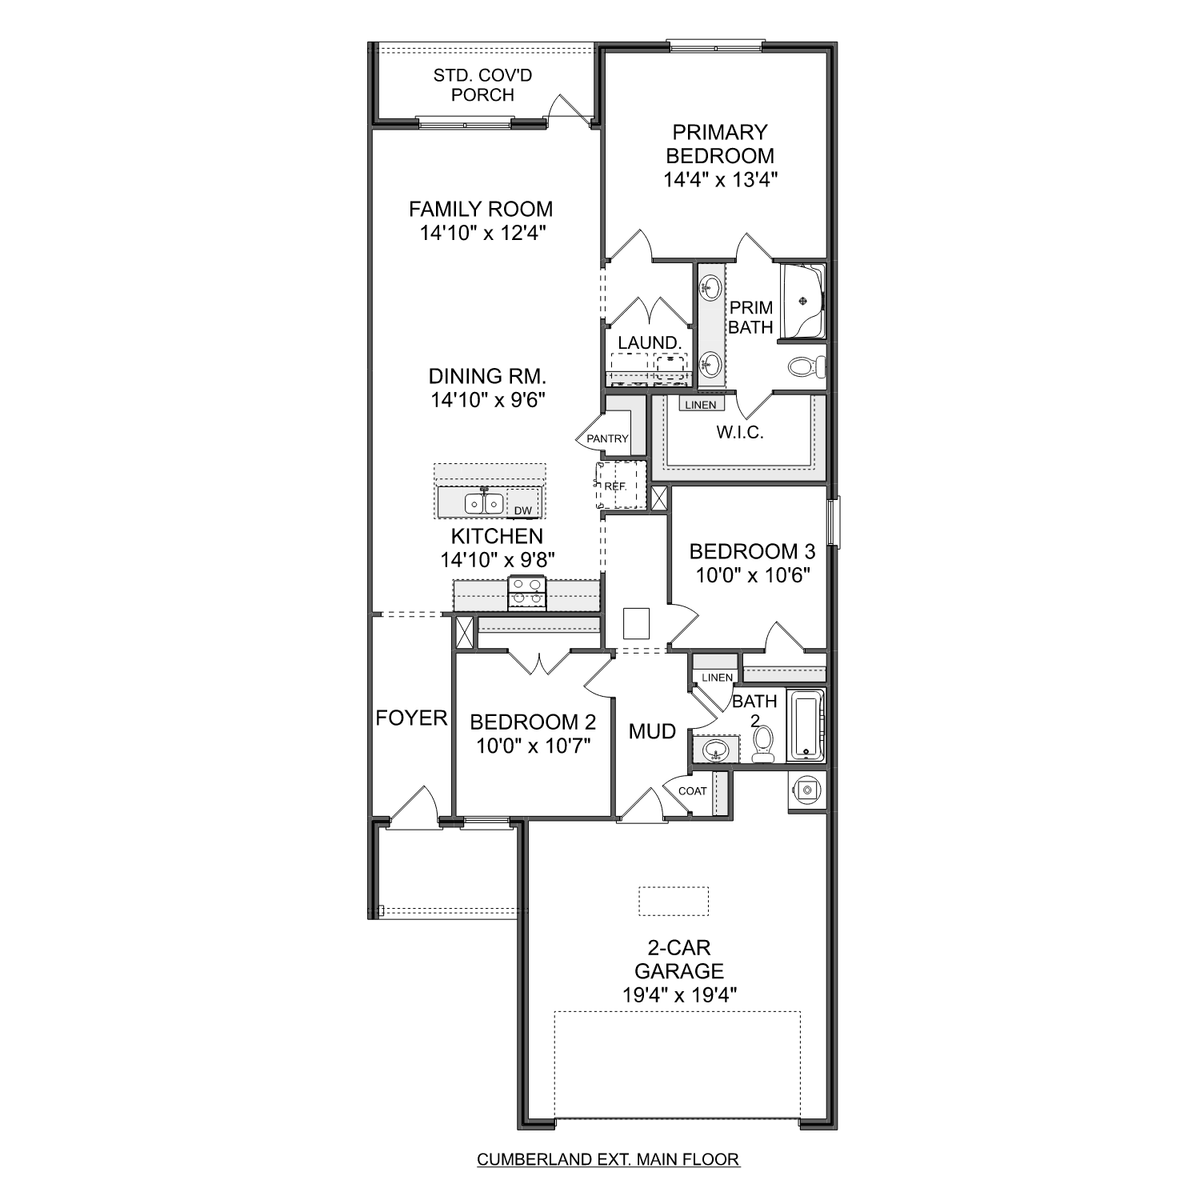 1 - The Cumberland B floor plan layout for 3152 Mead Way SE in Davidson Homes' Hollon Meadow community.